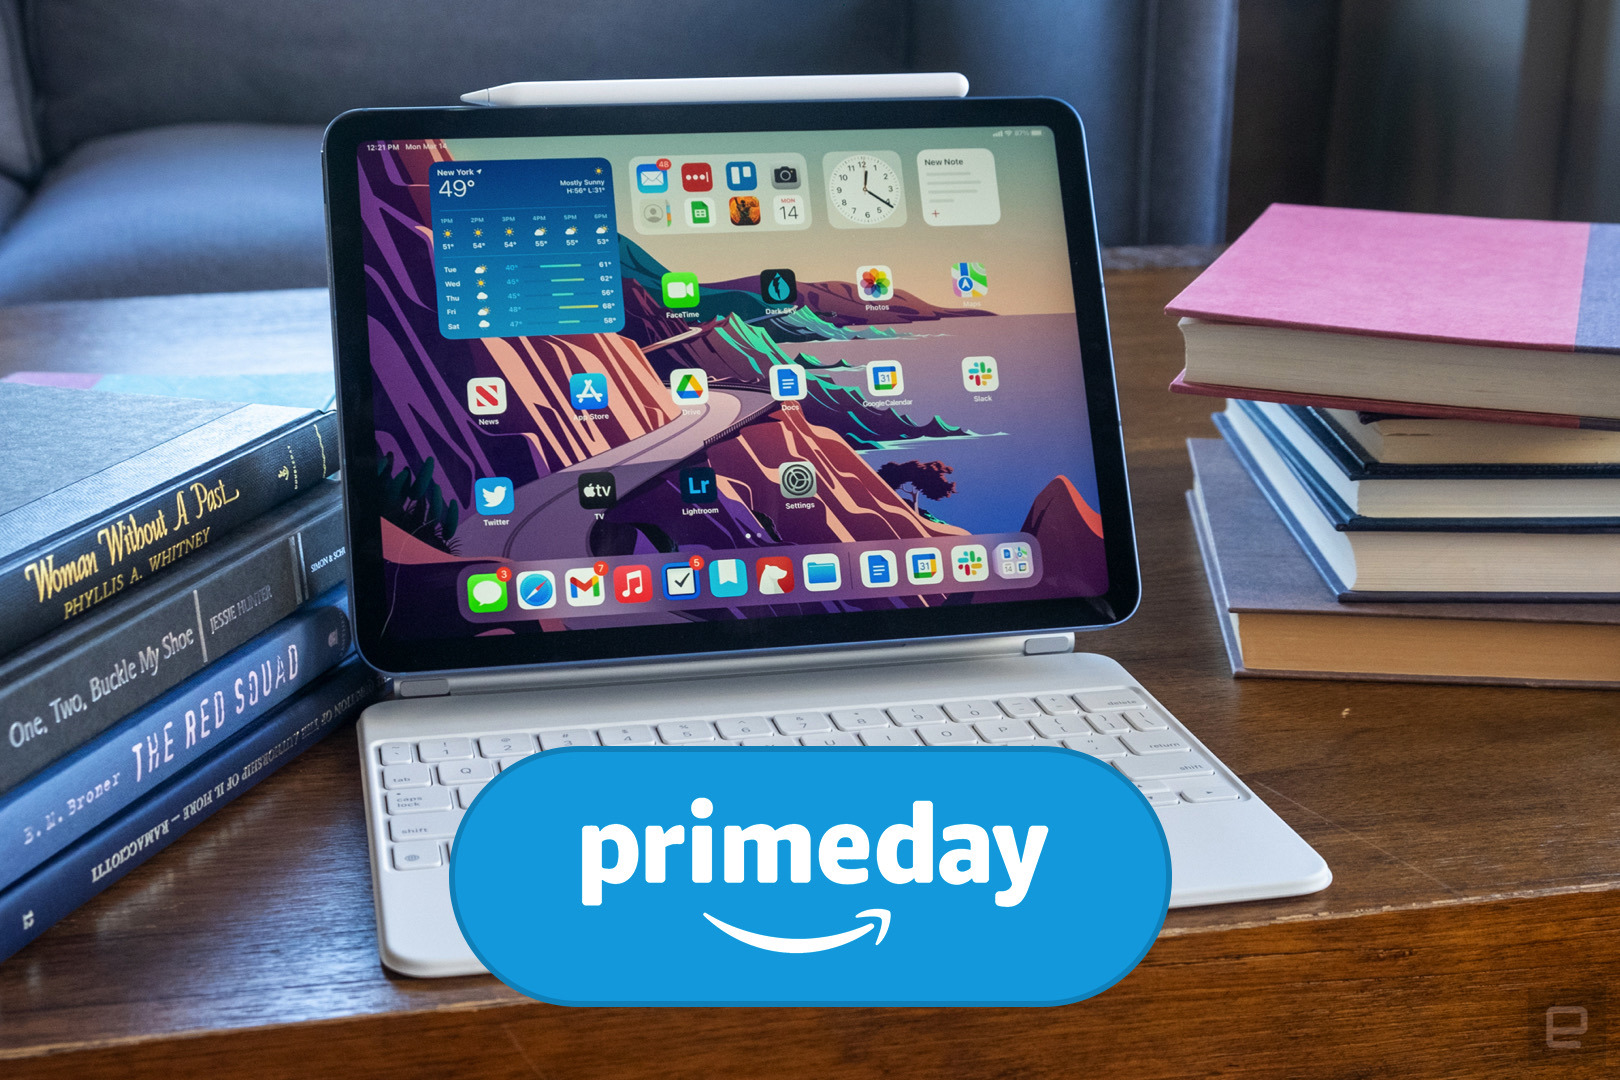 The best Amazon Prime Day Apple deals on AirPods, MacBooks and more for